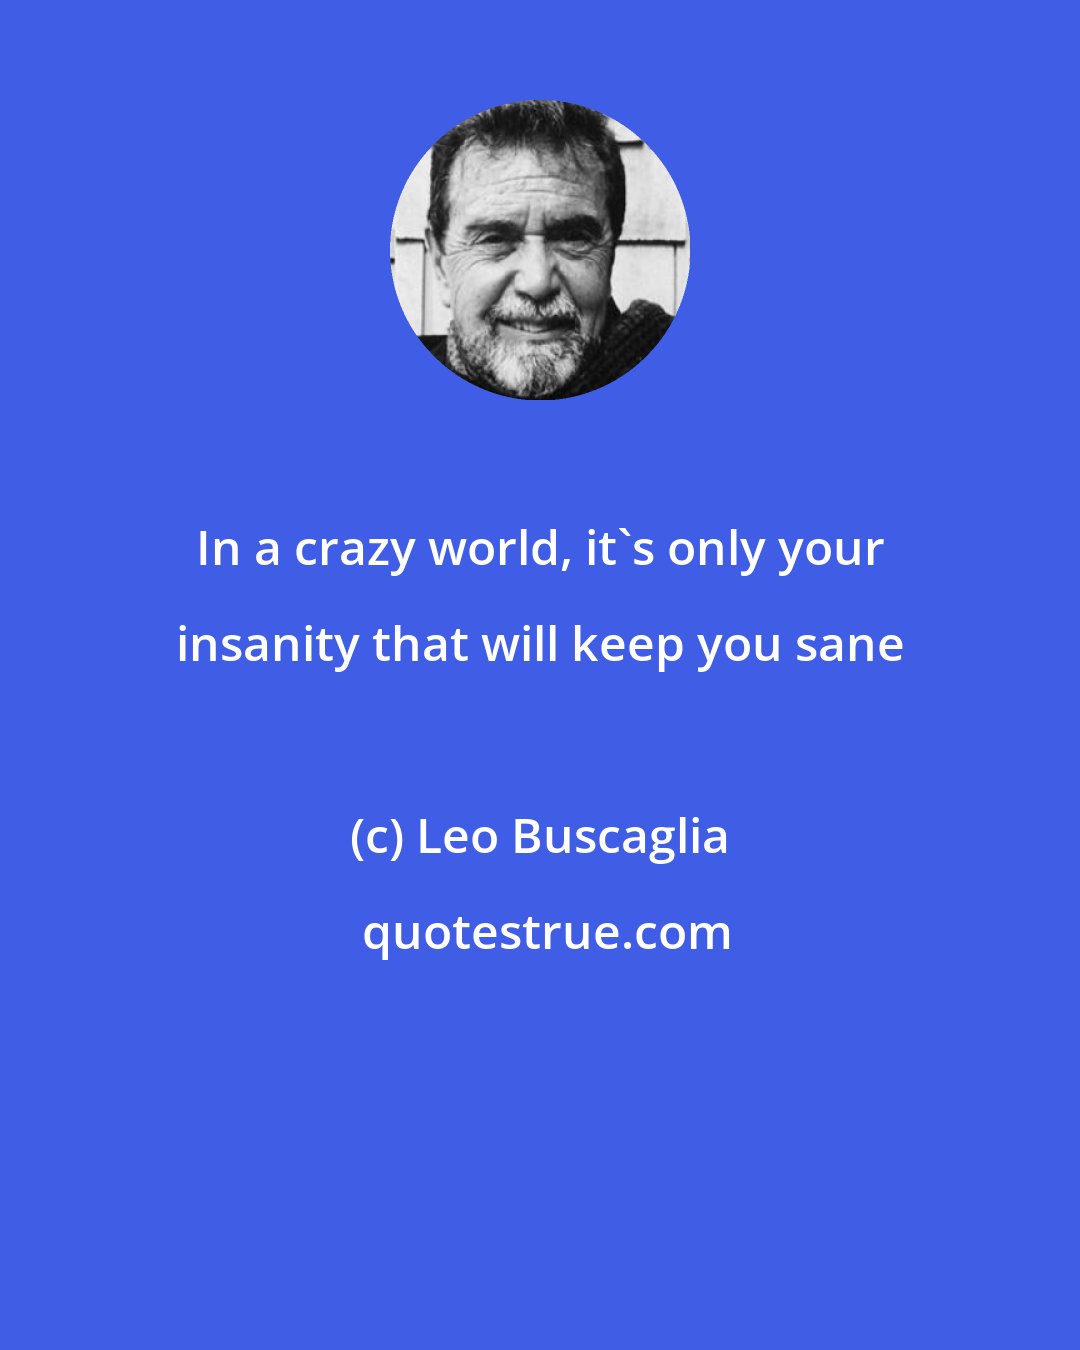 Leo Buscaglia: In a crazy world, it's only your insanity that will keep you sane